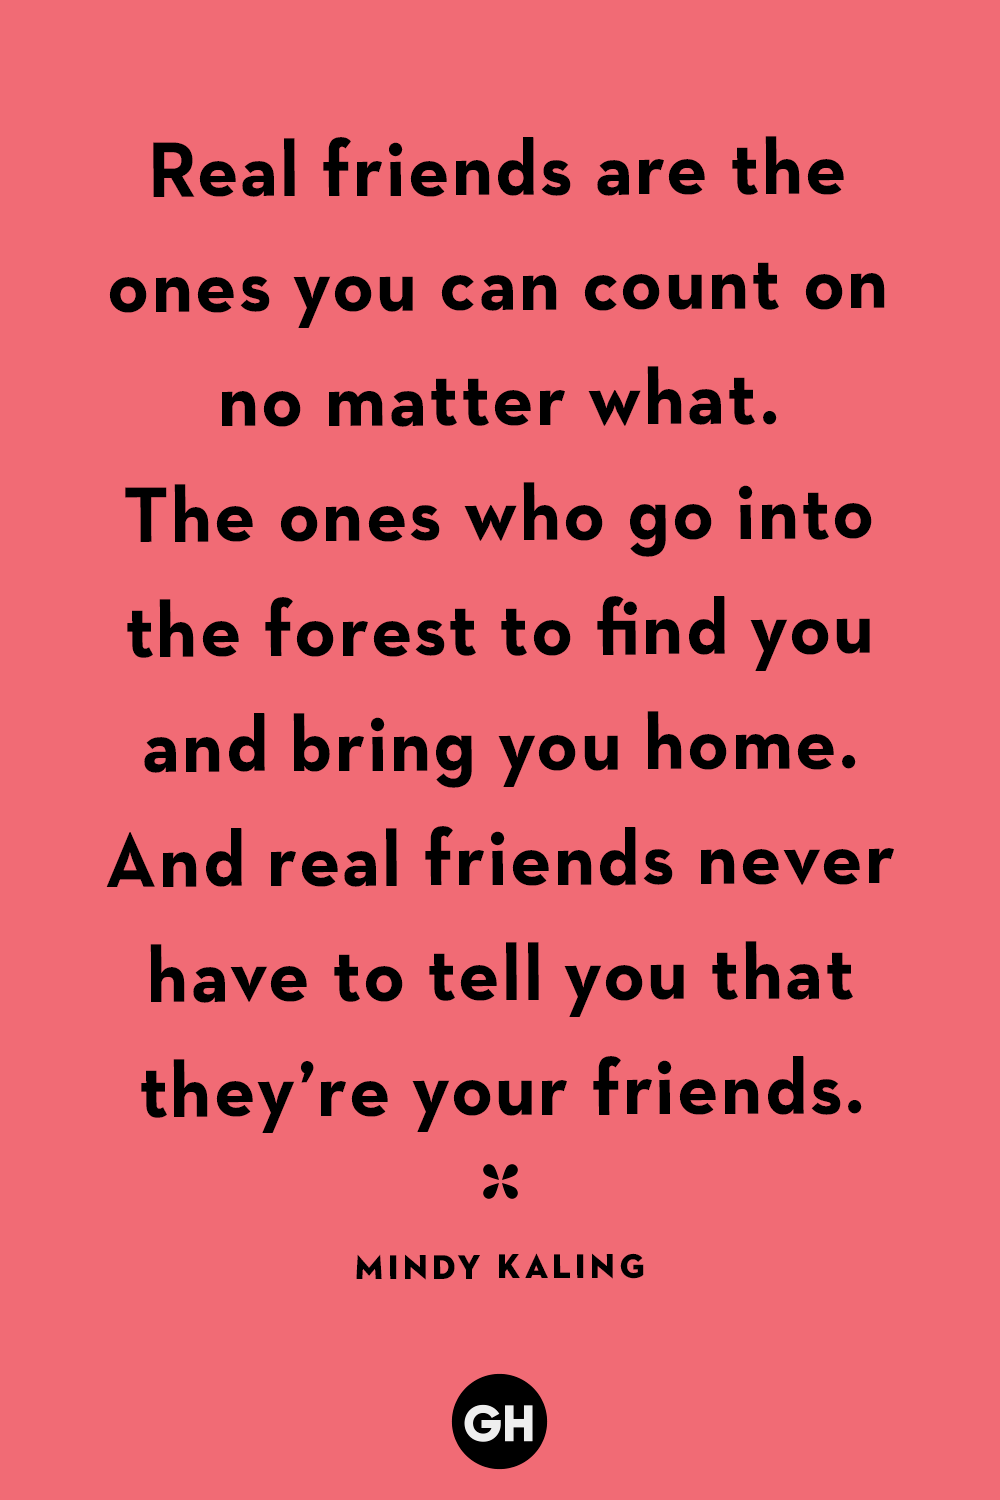 friendship quotes and sayings wallpapers